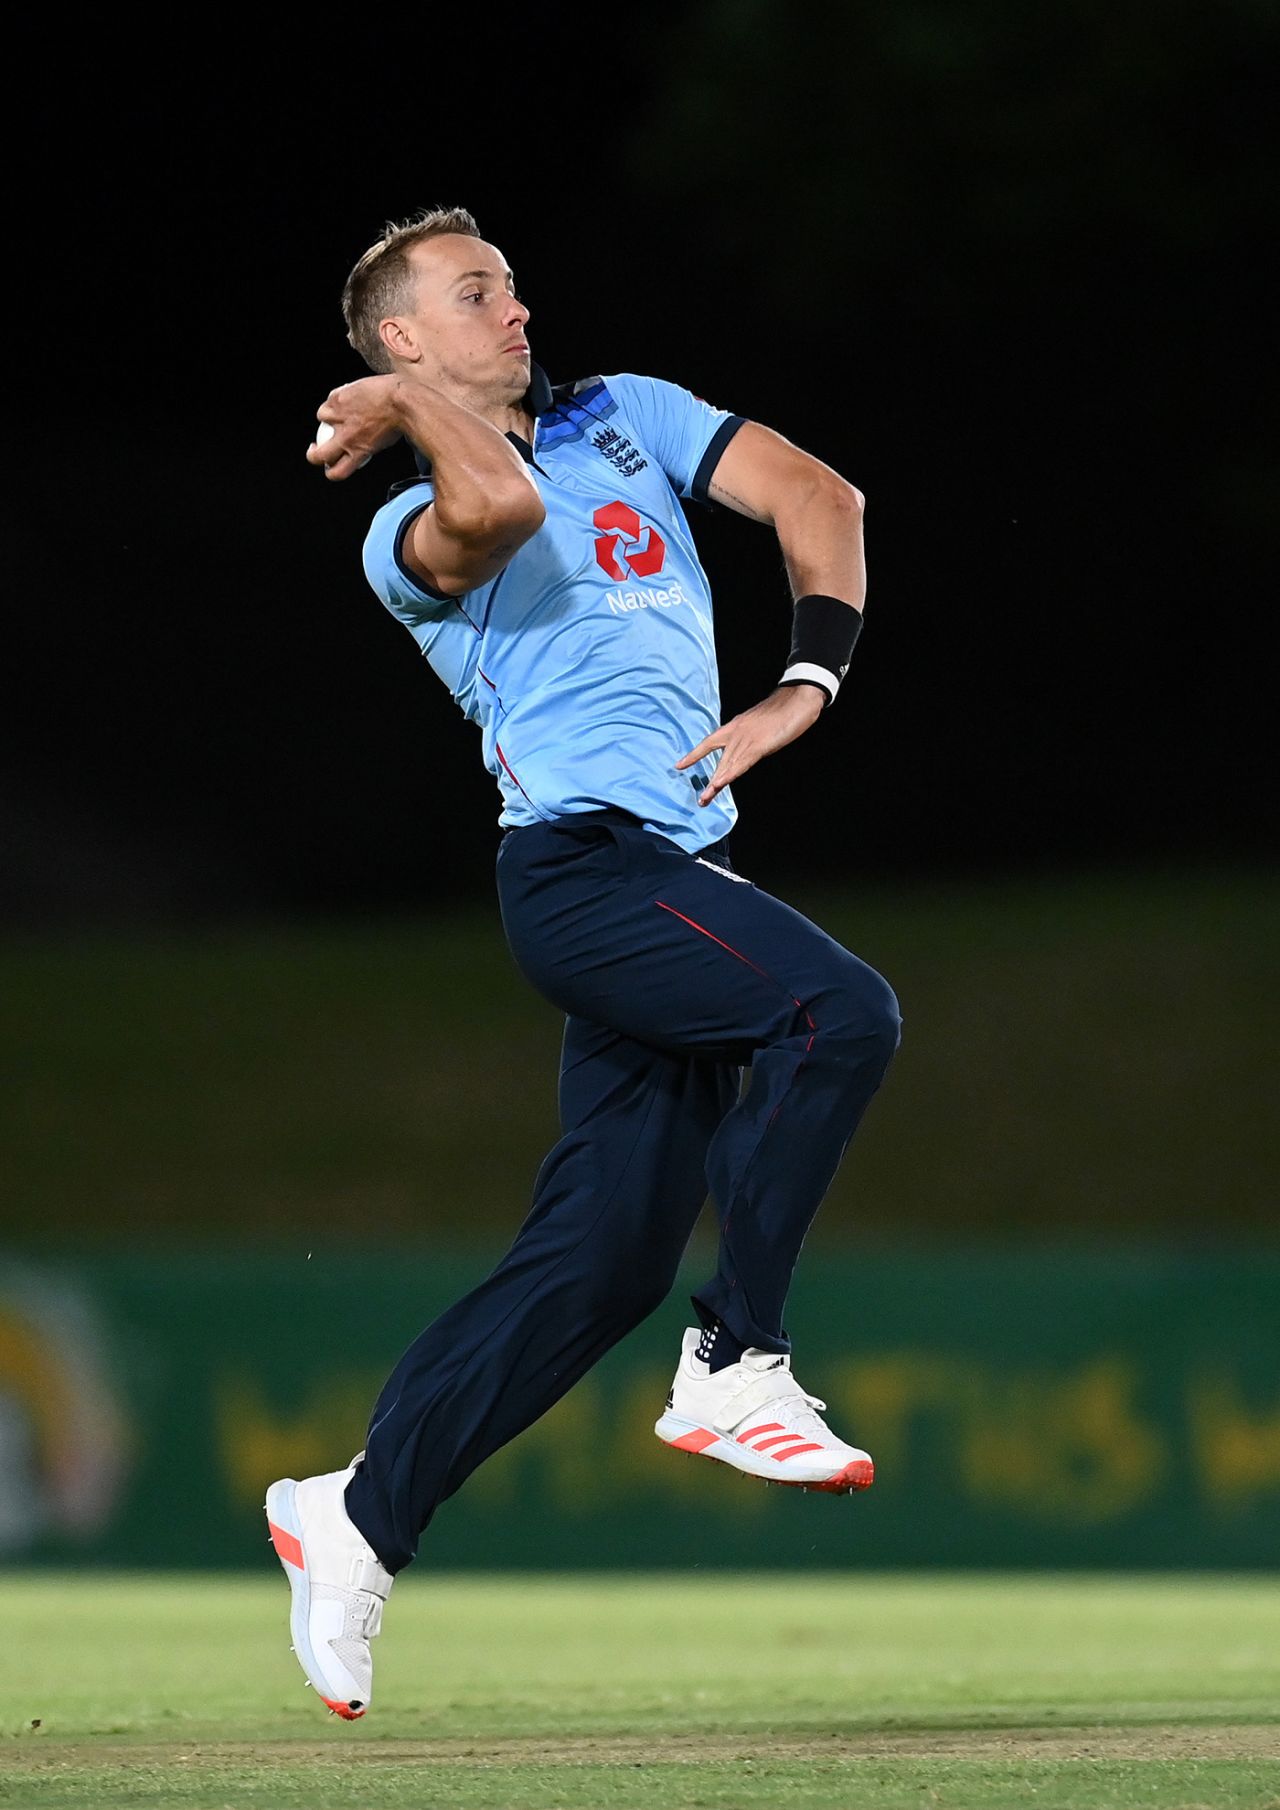 Tom Curran in his delivery stride, Team Morgan v Team Buttler, Tour match, Paarl, November 23, 2020